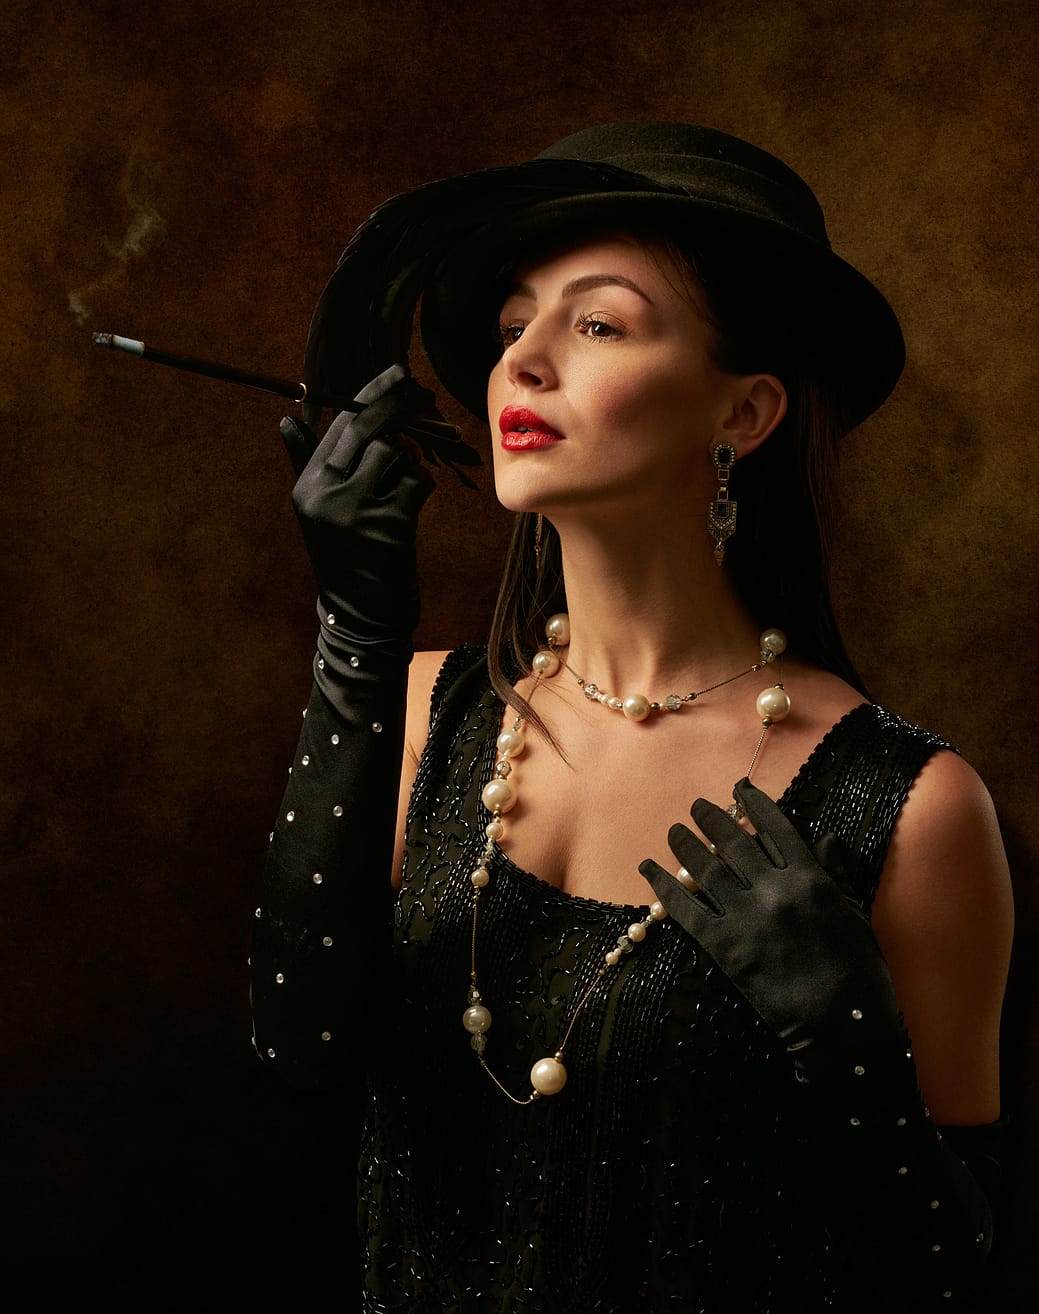 woman in black dreaa and black gloves, black hat, with pearls and earings